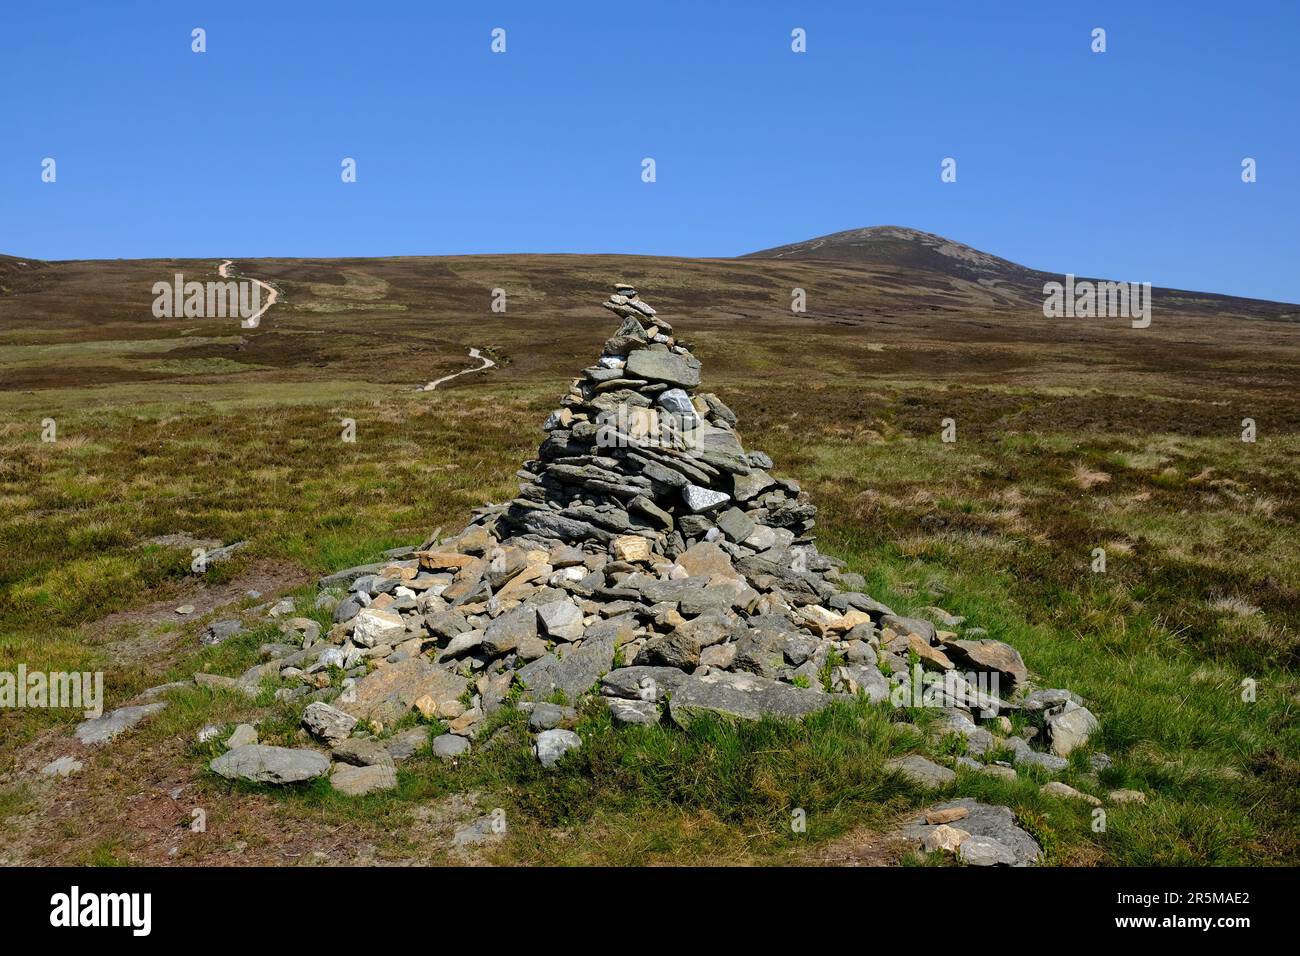 Navigation cairn on the track up to munro Mount Keen, Angus Glens, Scotland Stock Photo